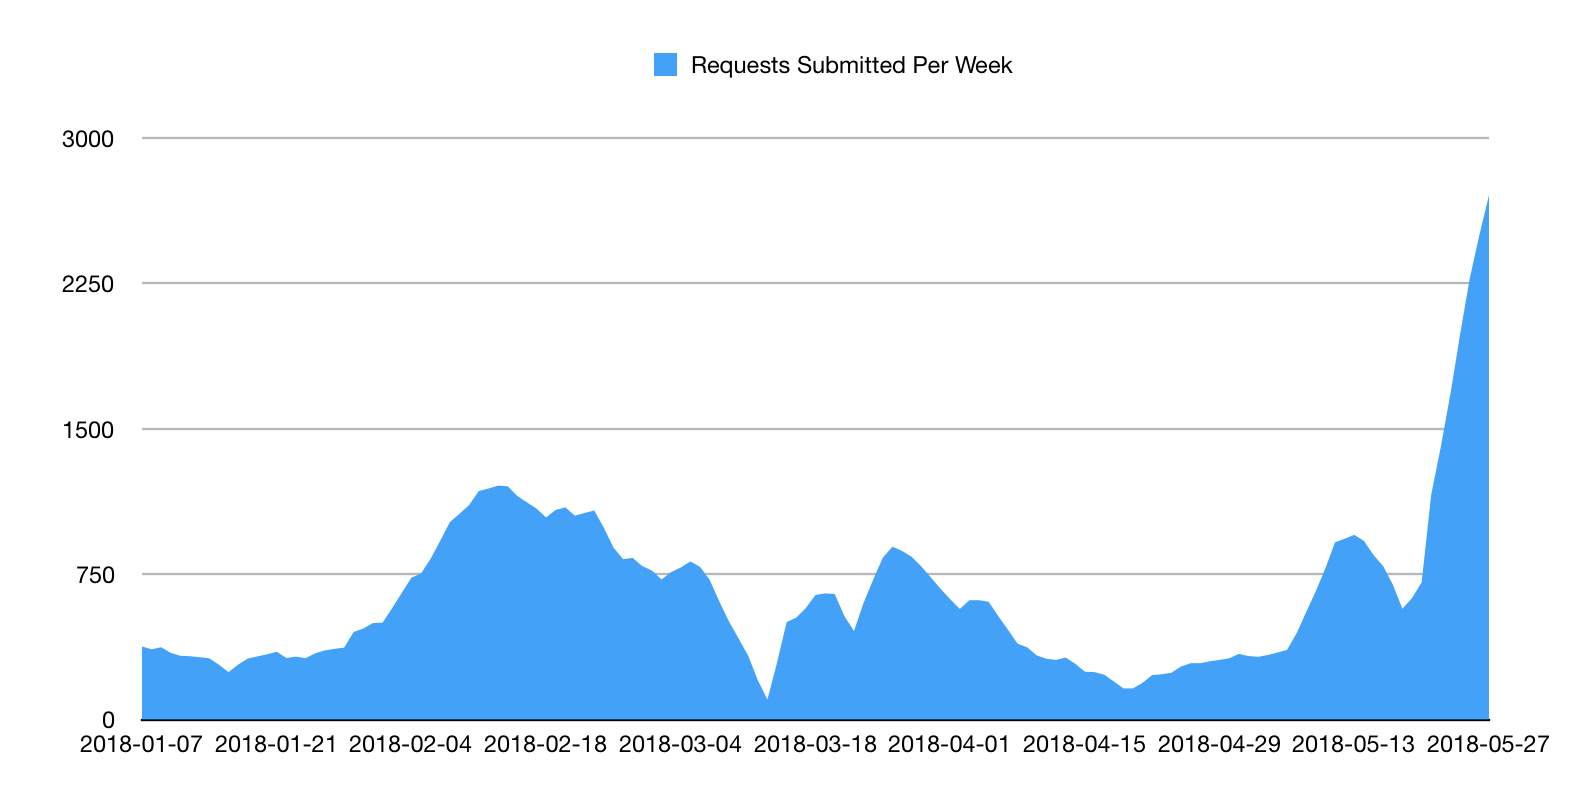 Number of requests submitted per week since start of year